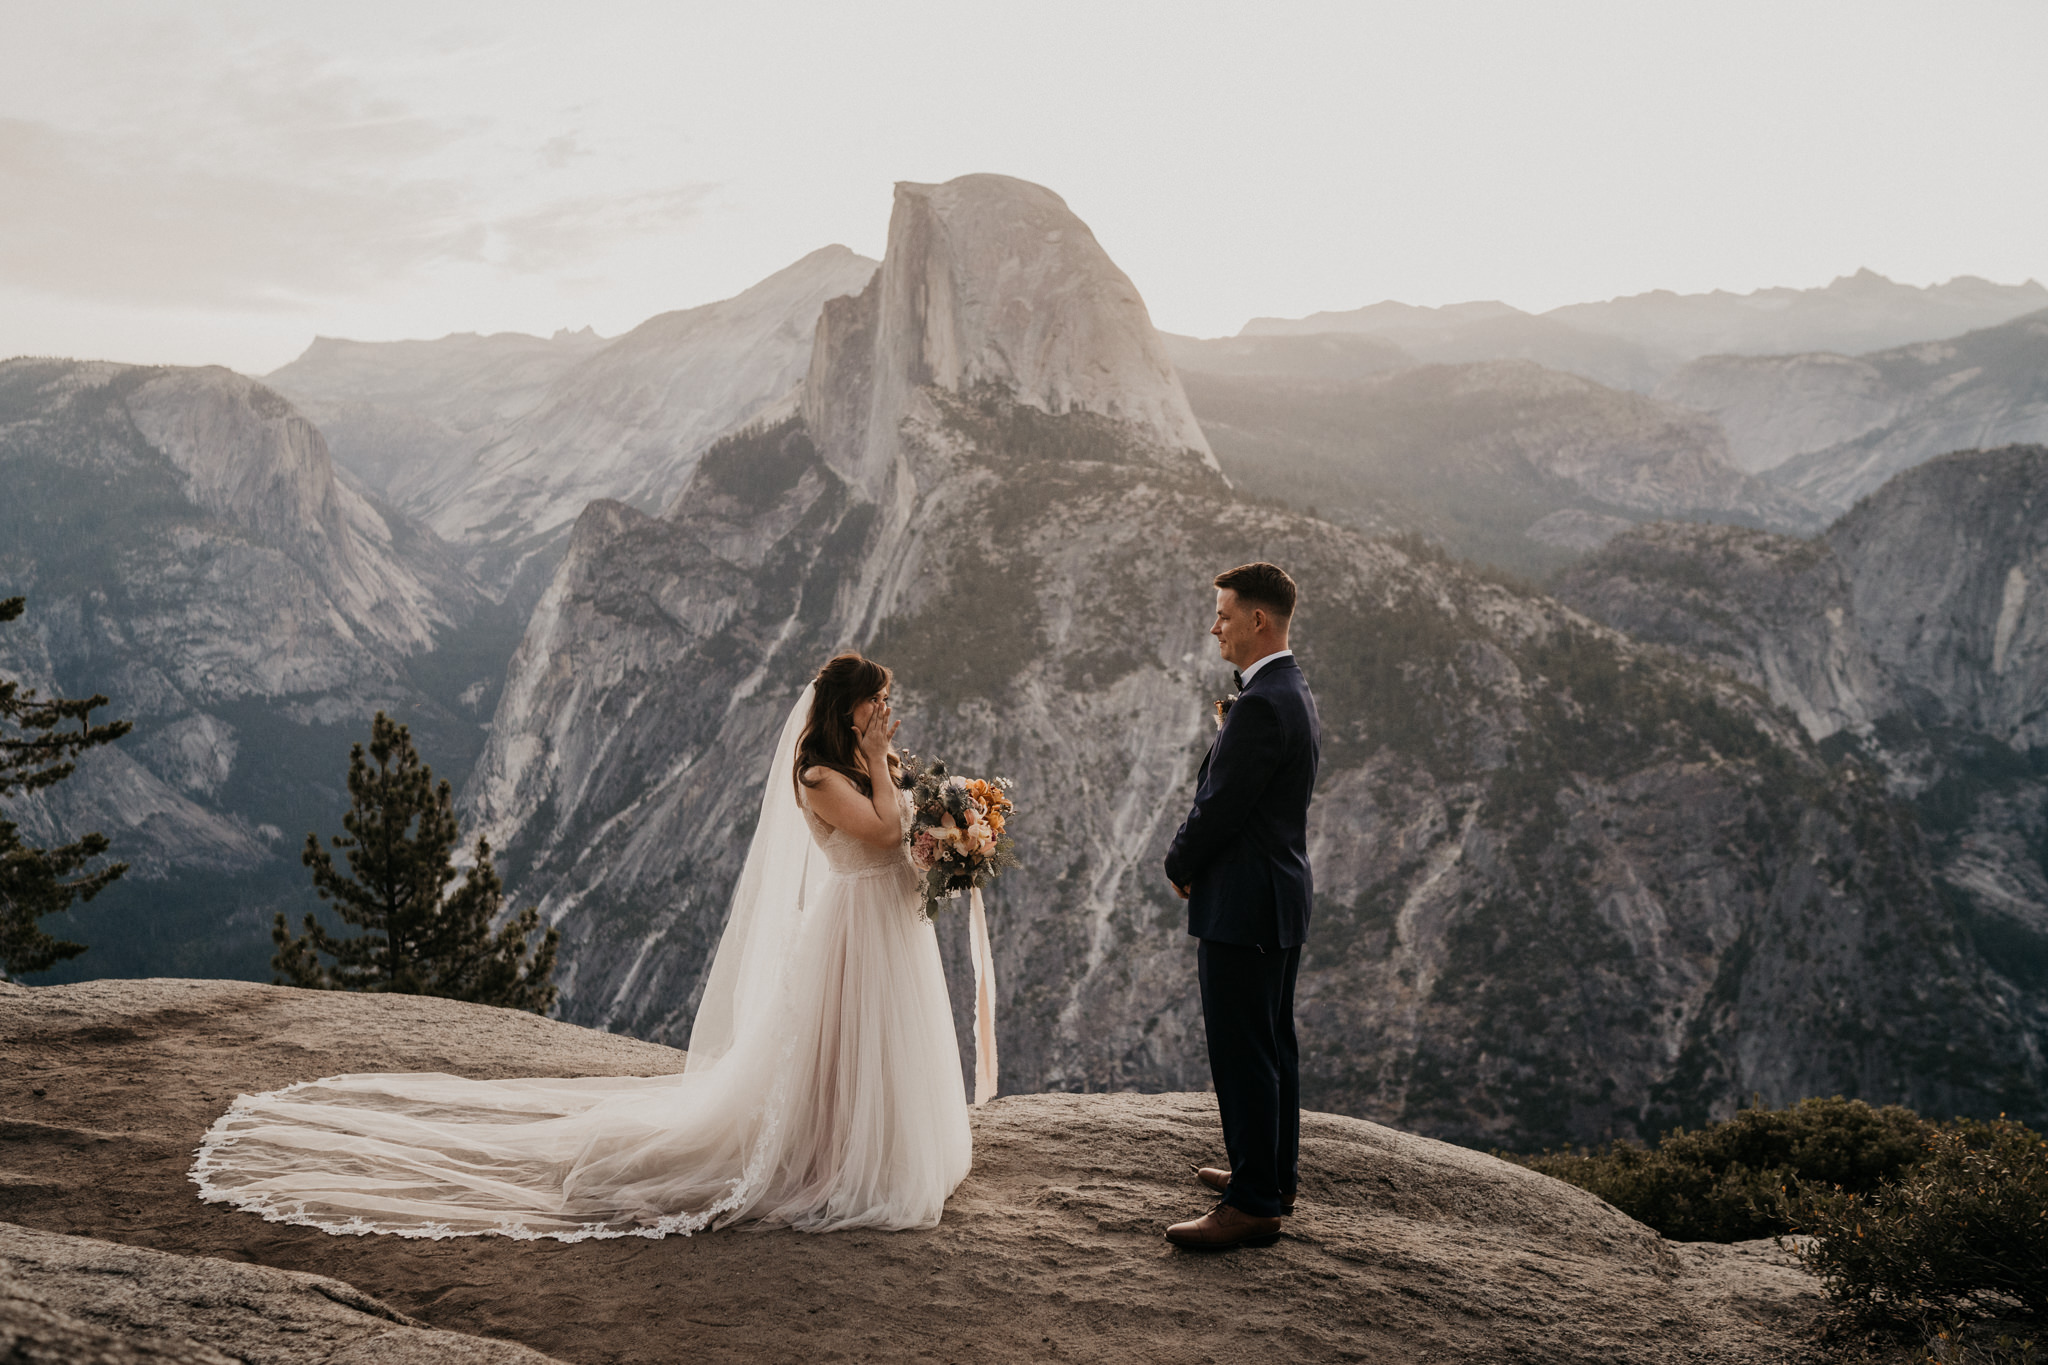 Elopement Chronicles: Telling Your Love Story Through the Lens